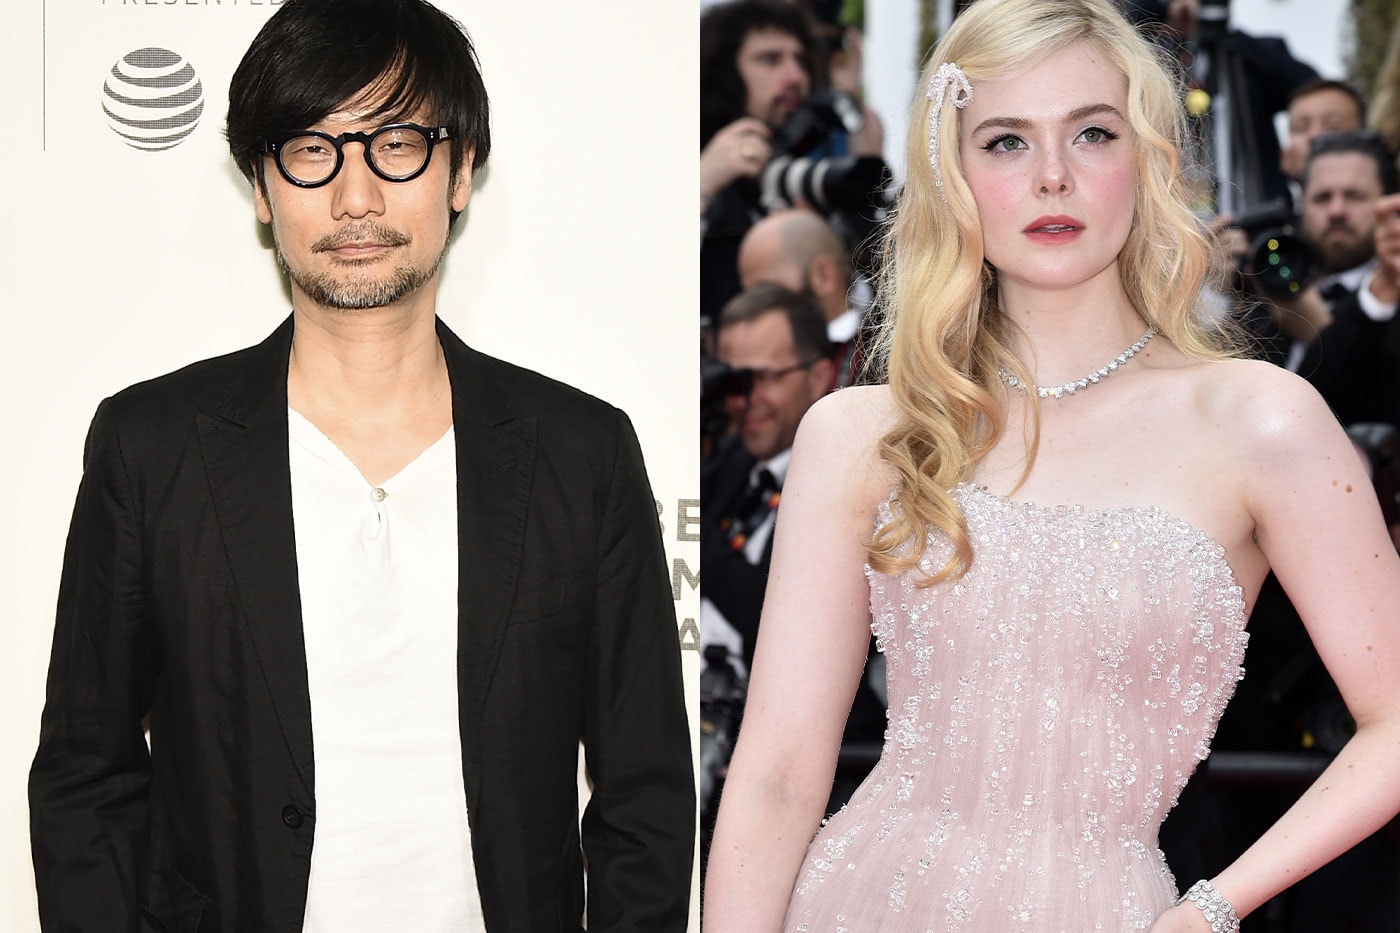 Death Stranding 2 to Feature Actress Elle Fanning